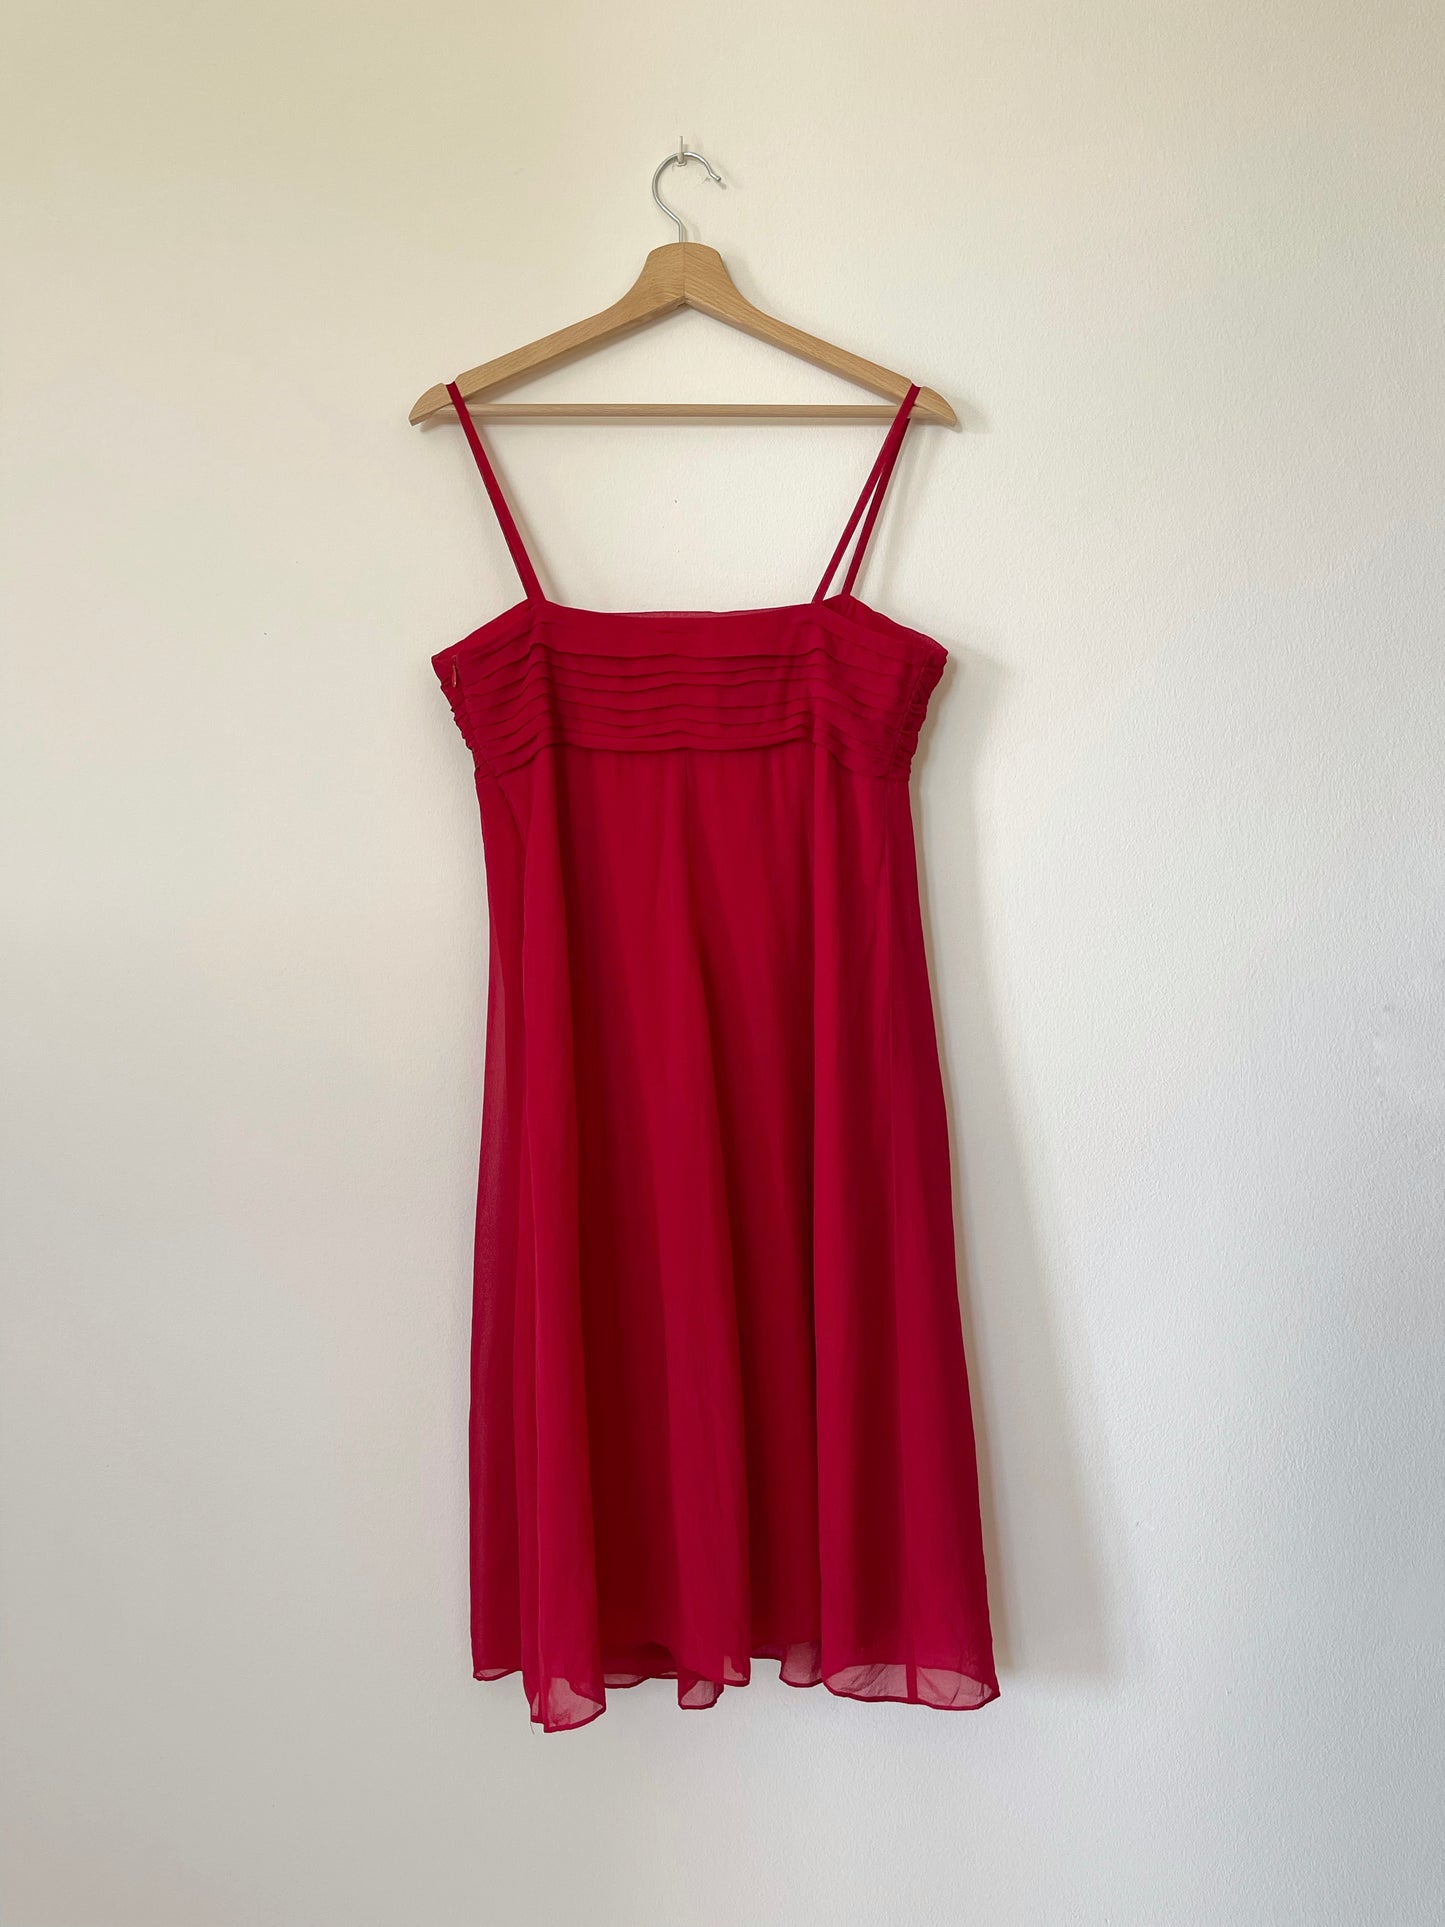 Vintage cocktail silk dress by French brand 1.2.3 Paris